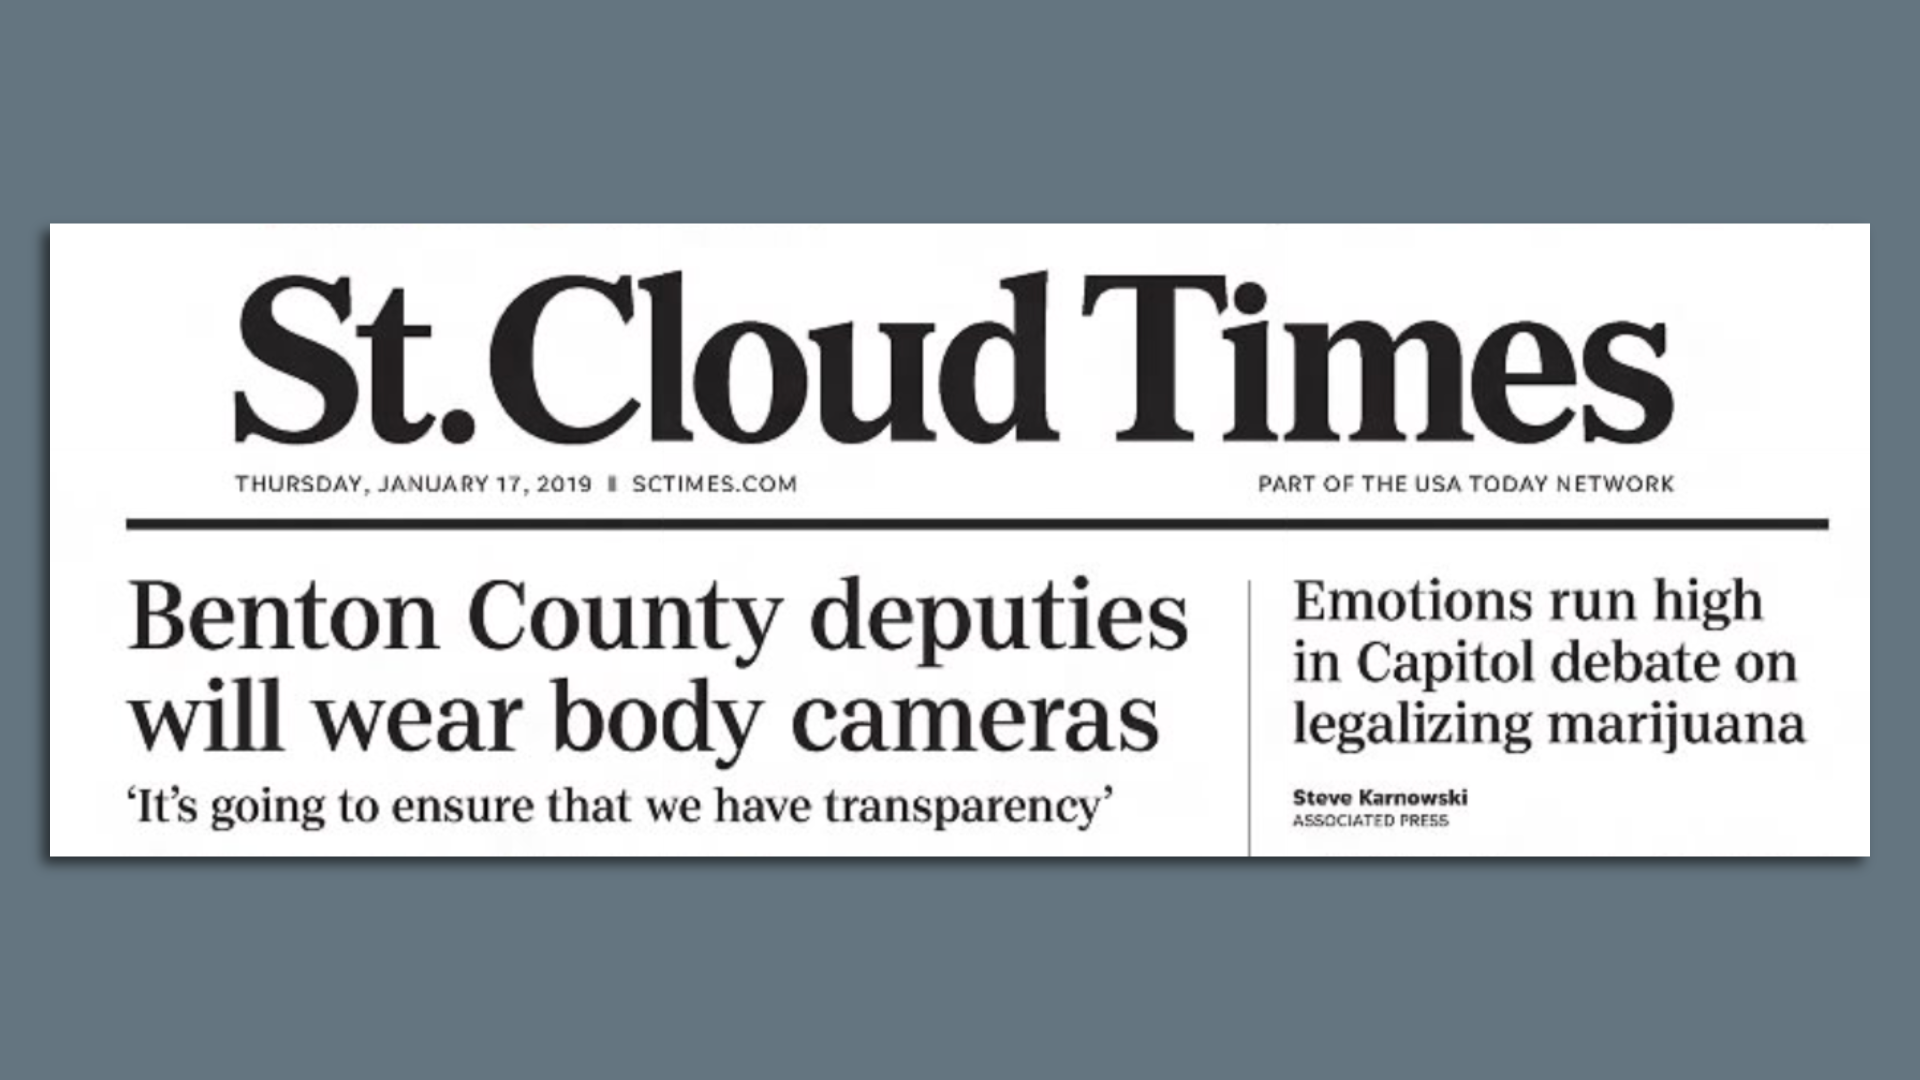 The St. Cloud Times front page from 2019